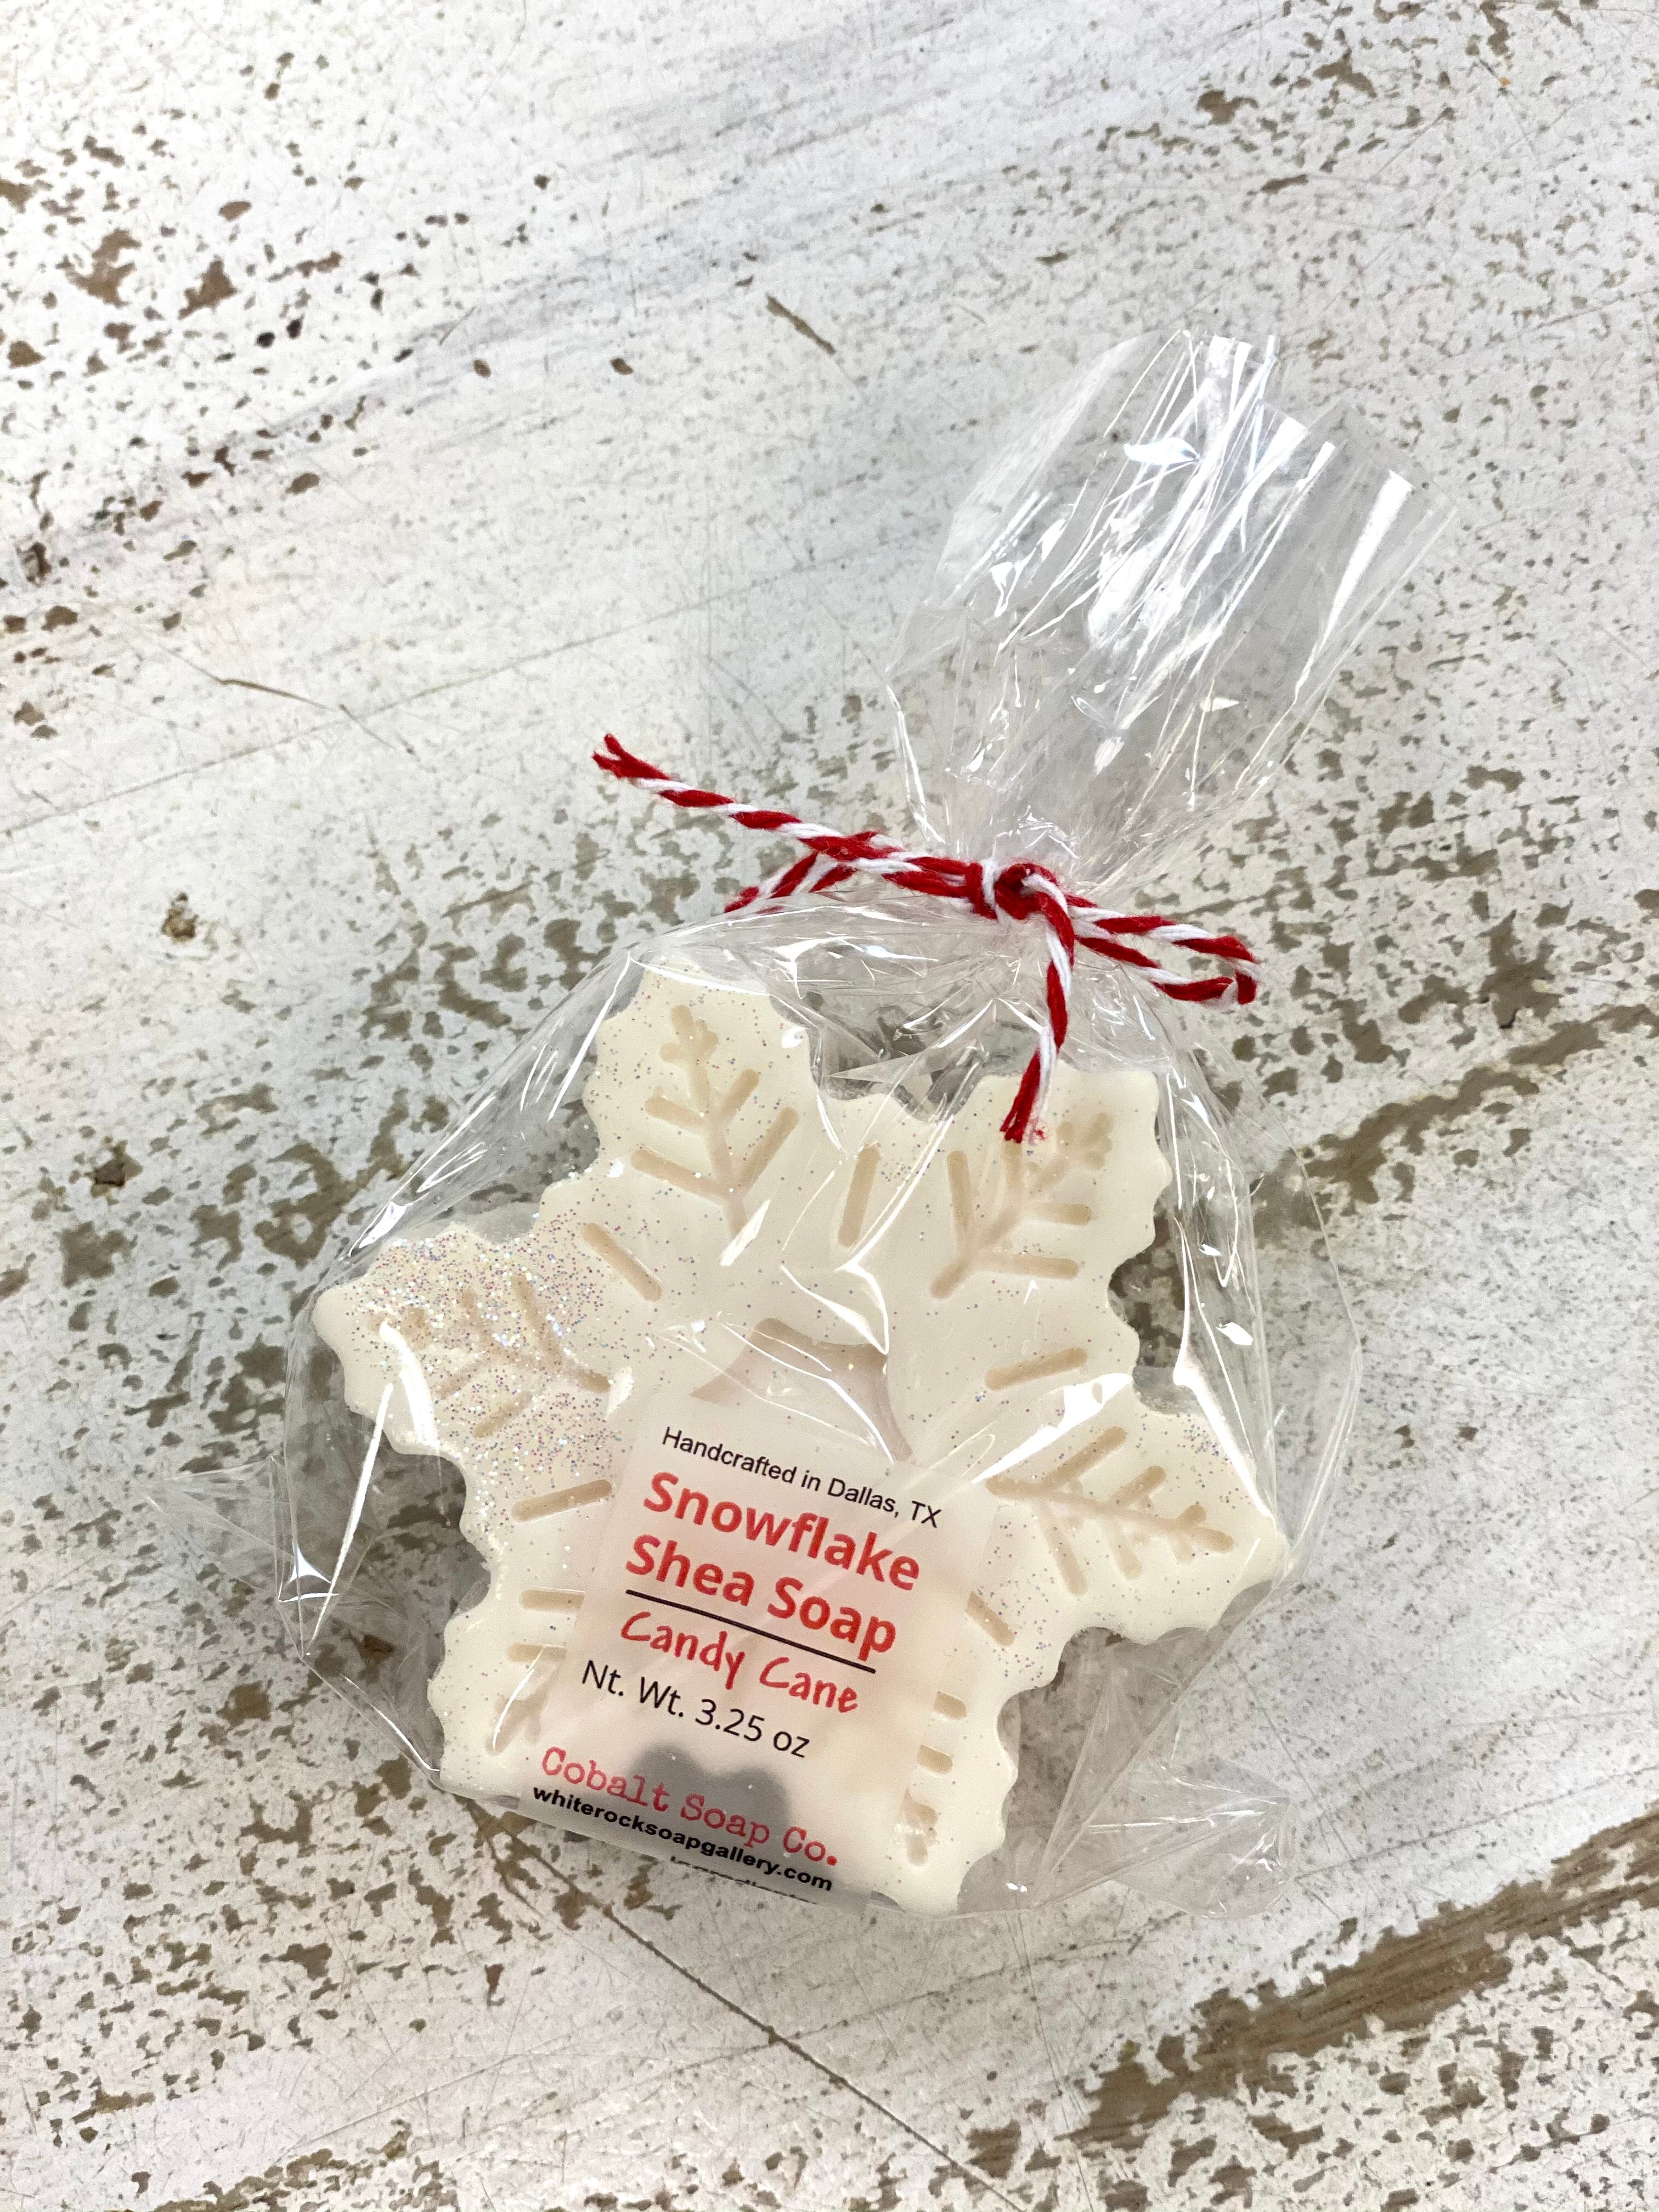 Snowflake Soap Candy Cane